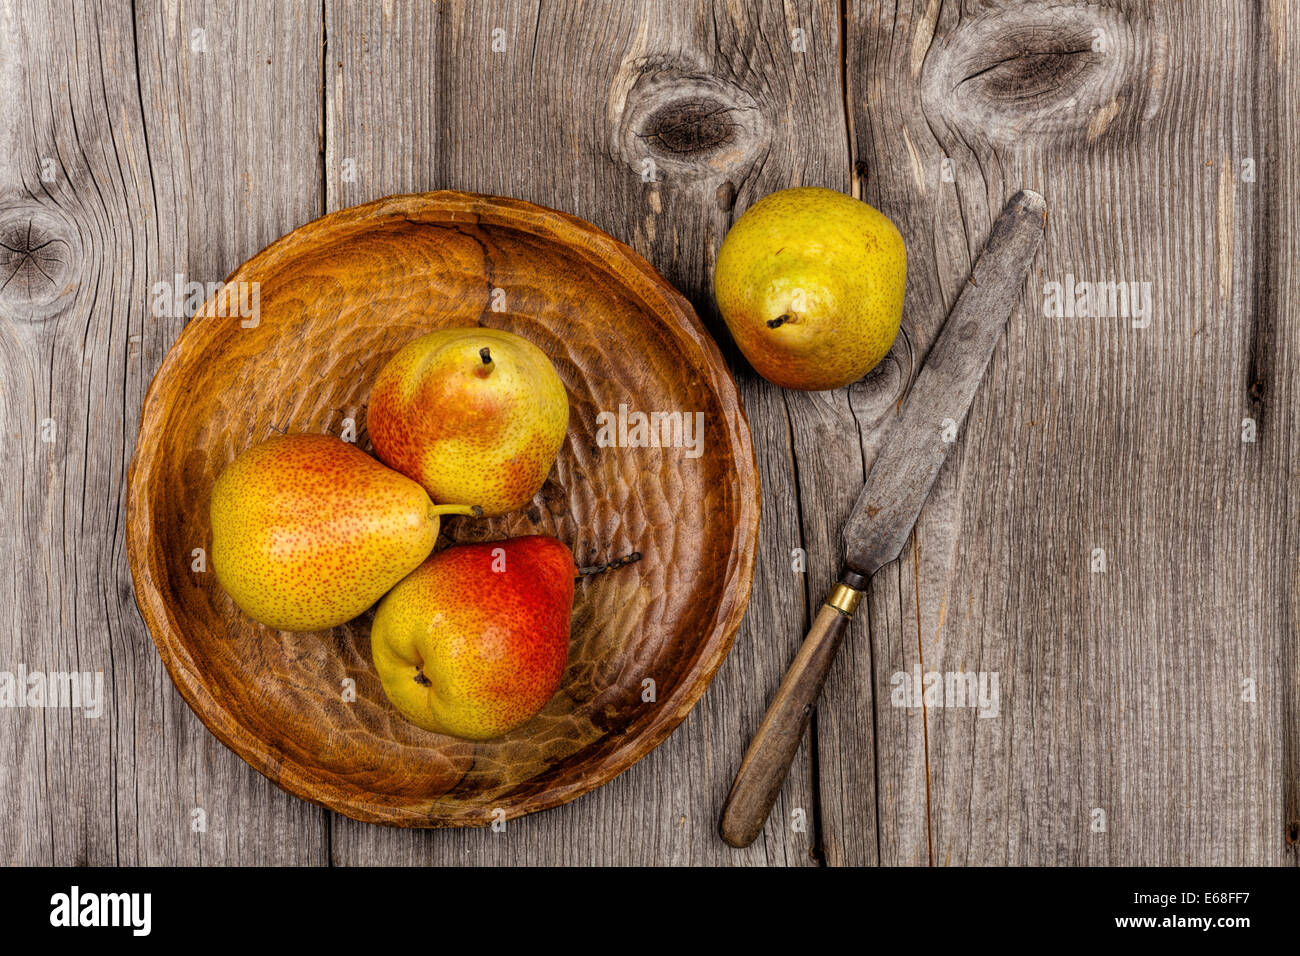 Pears on a wooden plate with a knife on an old rustic wooden table in country style Stock Photo